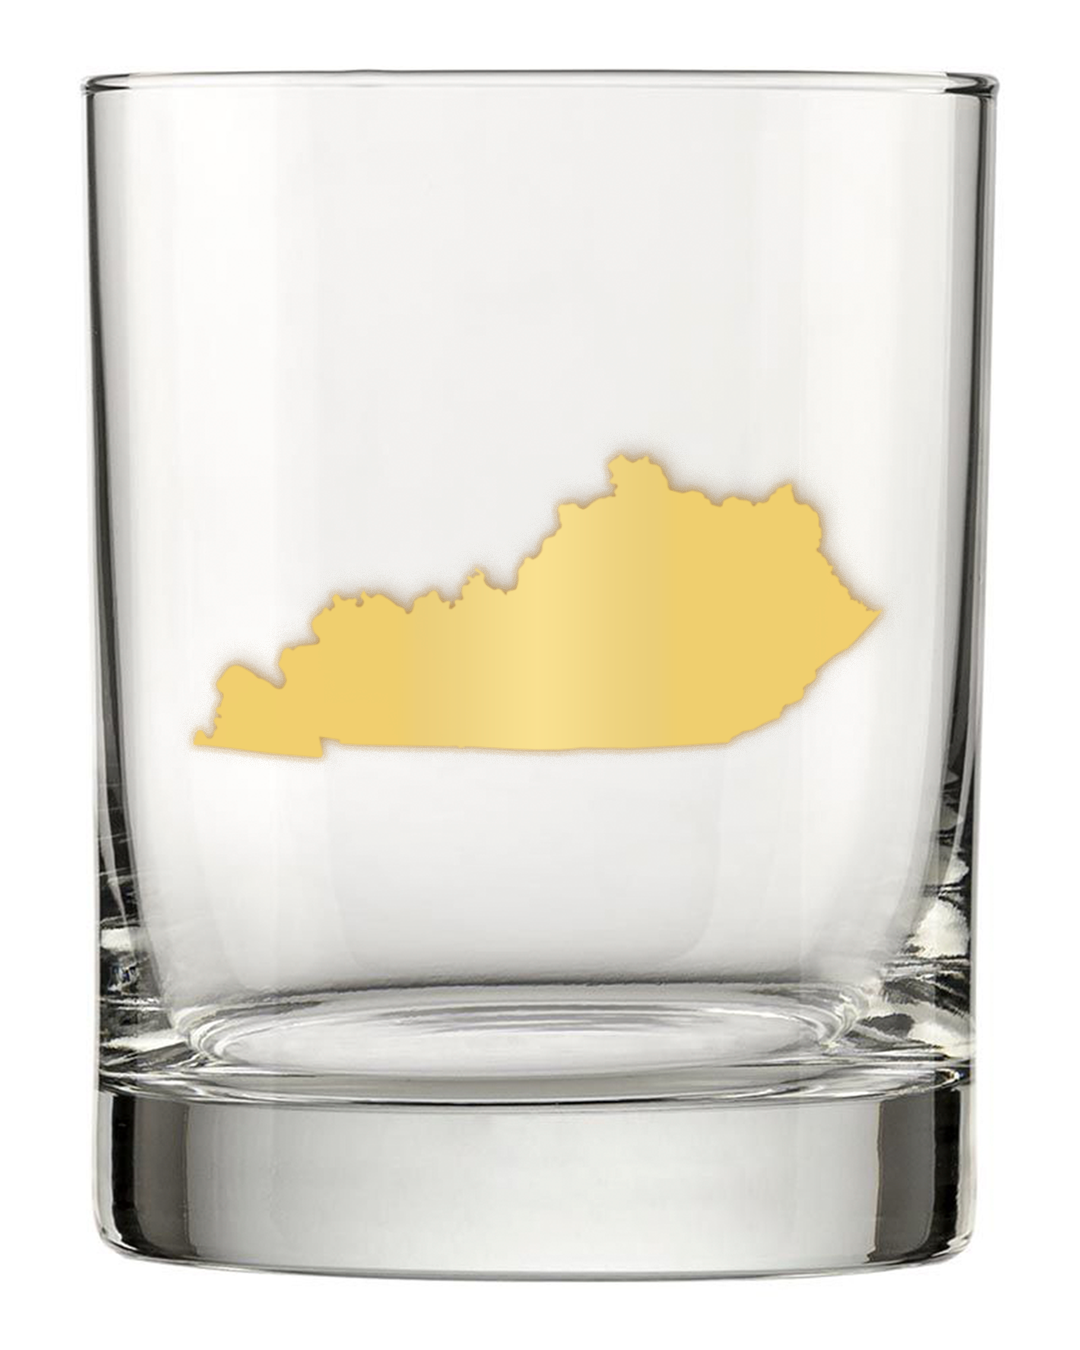 13.5oz Old Fashioned Rocks Glass with the state of Kentucky silhouetted in 22k gold foil on the face. Drinking Glass